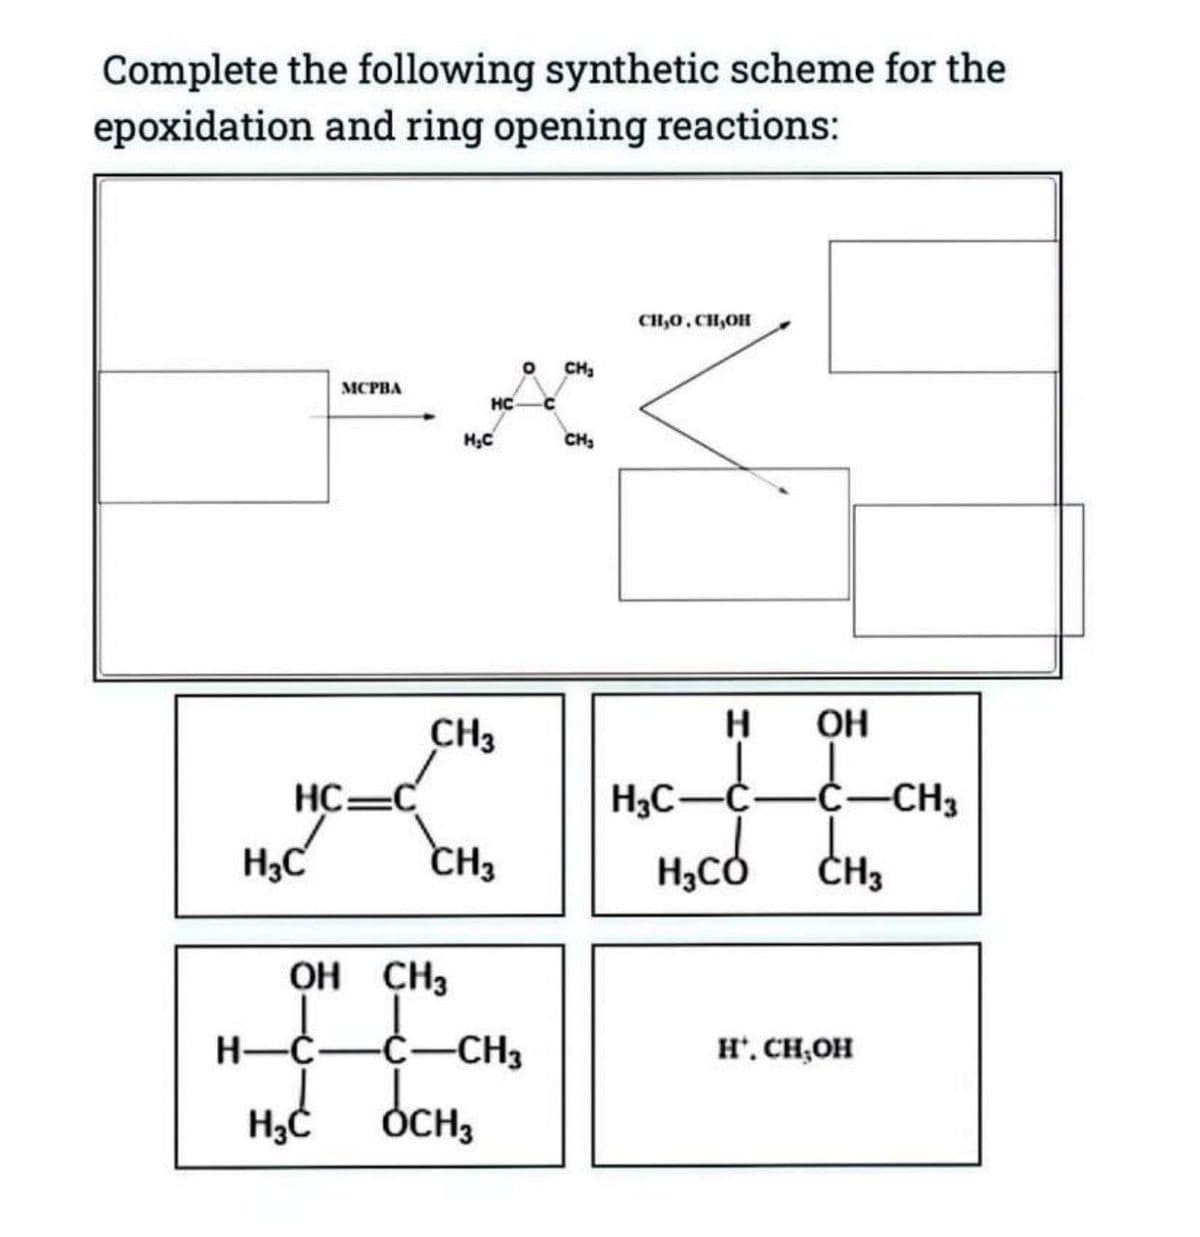 Complete the following synthetic scheme for the
epoxidation and ring opening reactions:
MCPBA
H.C
HC
° CH₂
CH₂
CH,O,CH,OH
CH3
H
OH
HC=C
H3C-C
-C-CH3
H3C
CH3
HỌ CÓ CHO
H₂CO
OH CH3
H-C
-Ċ-CH3
H*. CH₂OH
H3C
OCH3